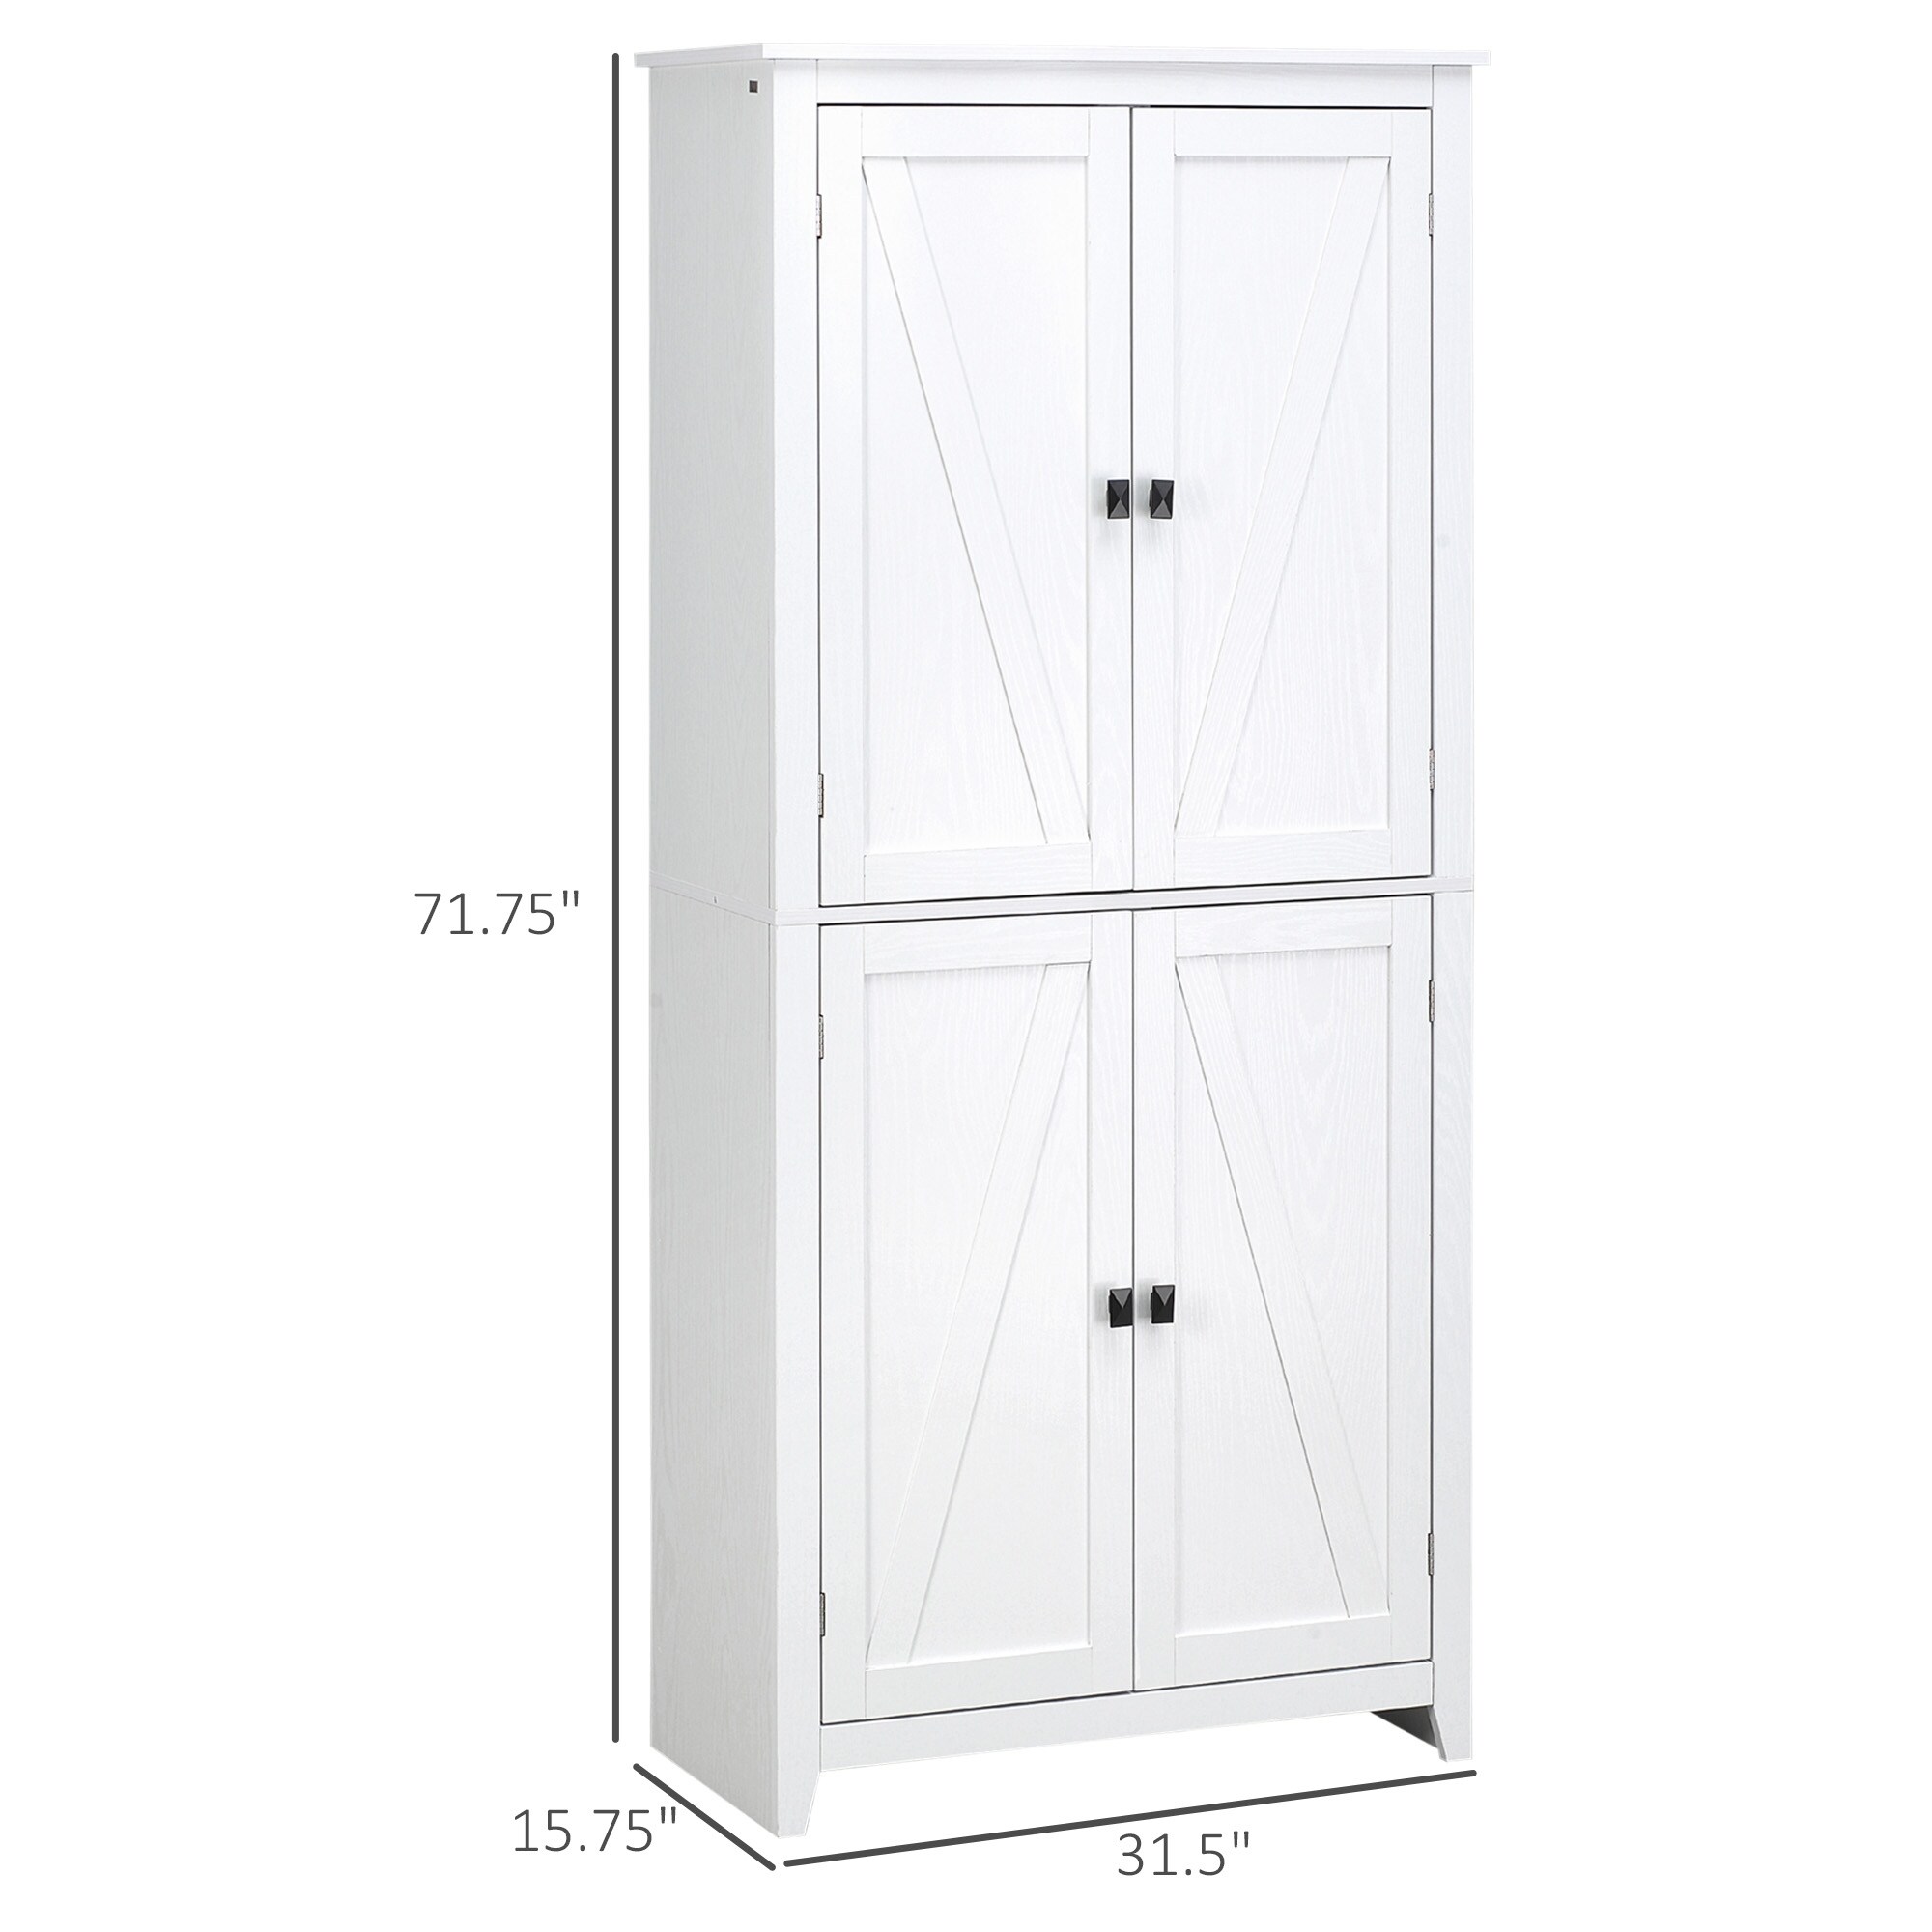 https://ak1.ostkcdn.com/images/products/is/images/direct/2c67ace796b7c1482617f2c4fa60afc38329bea7/HOMCOM-72%22-Freestanding-4-Door-Kitchen-Pantry%2C-Storage-Cabinet-Organizer-with-4-Tiers%2C-and-Adjustable-Shelves%2C-White.jpg